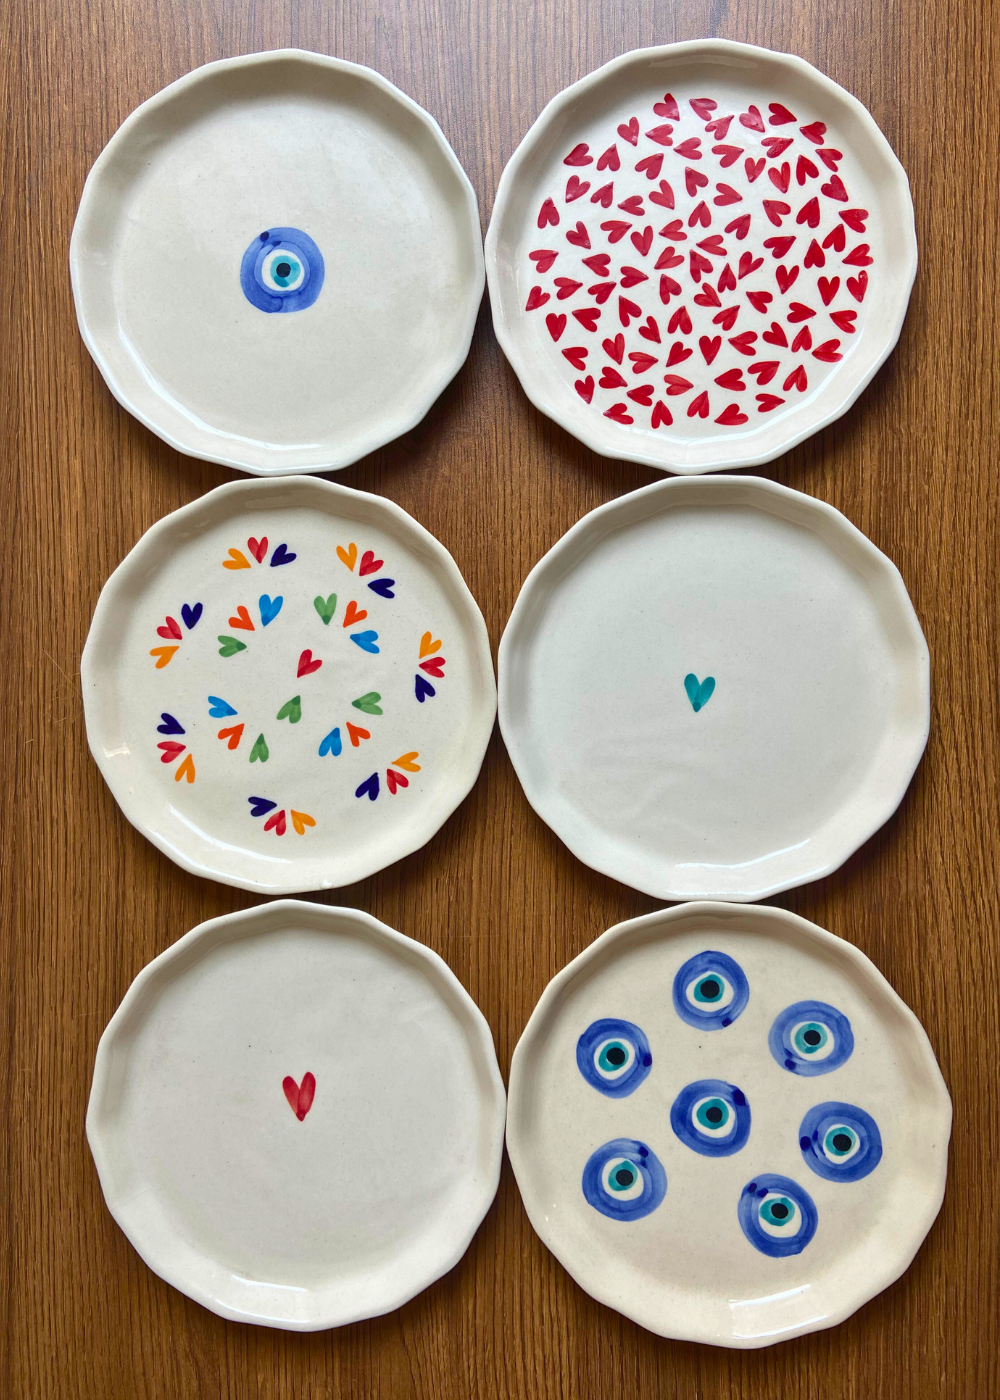 hearts & evil eye snack plates made by ceramic